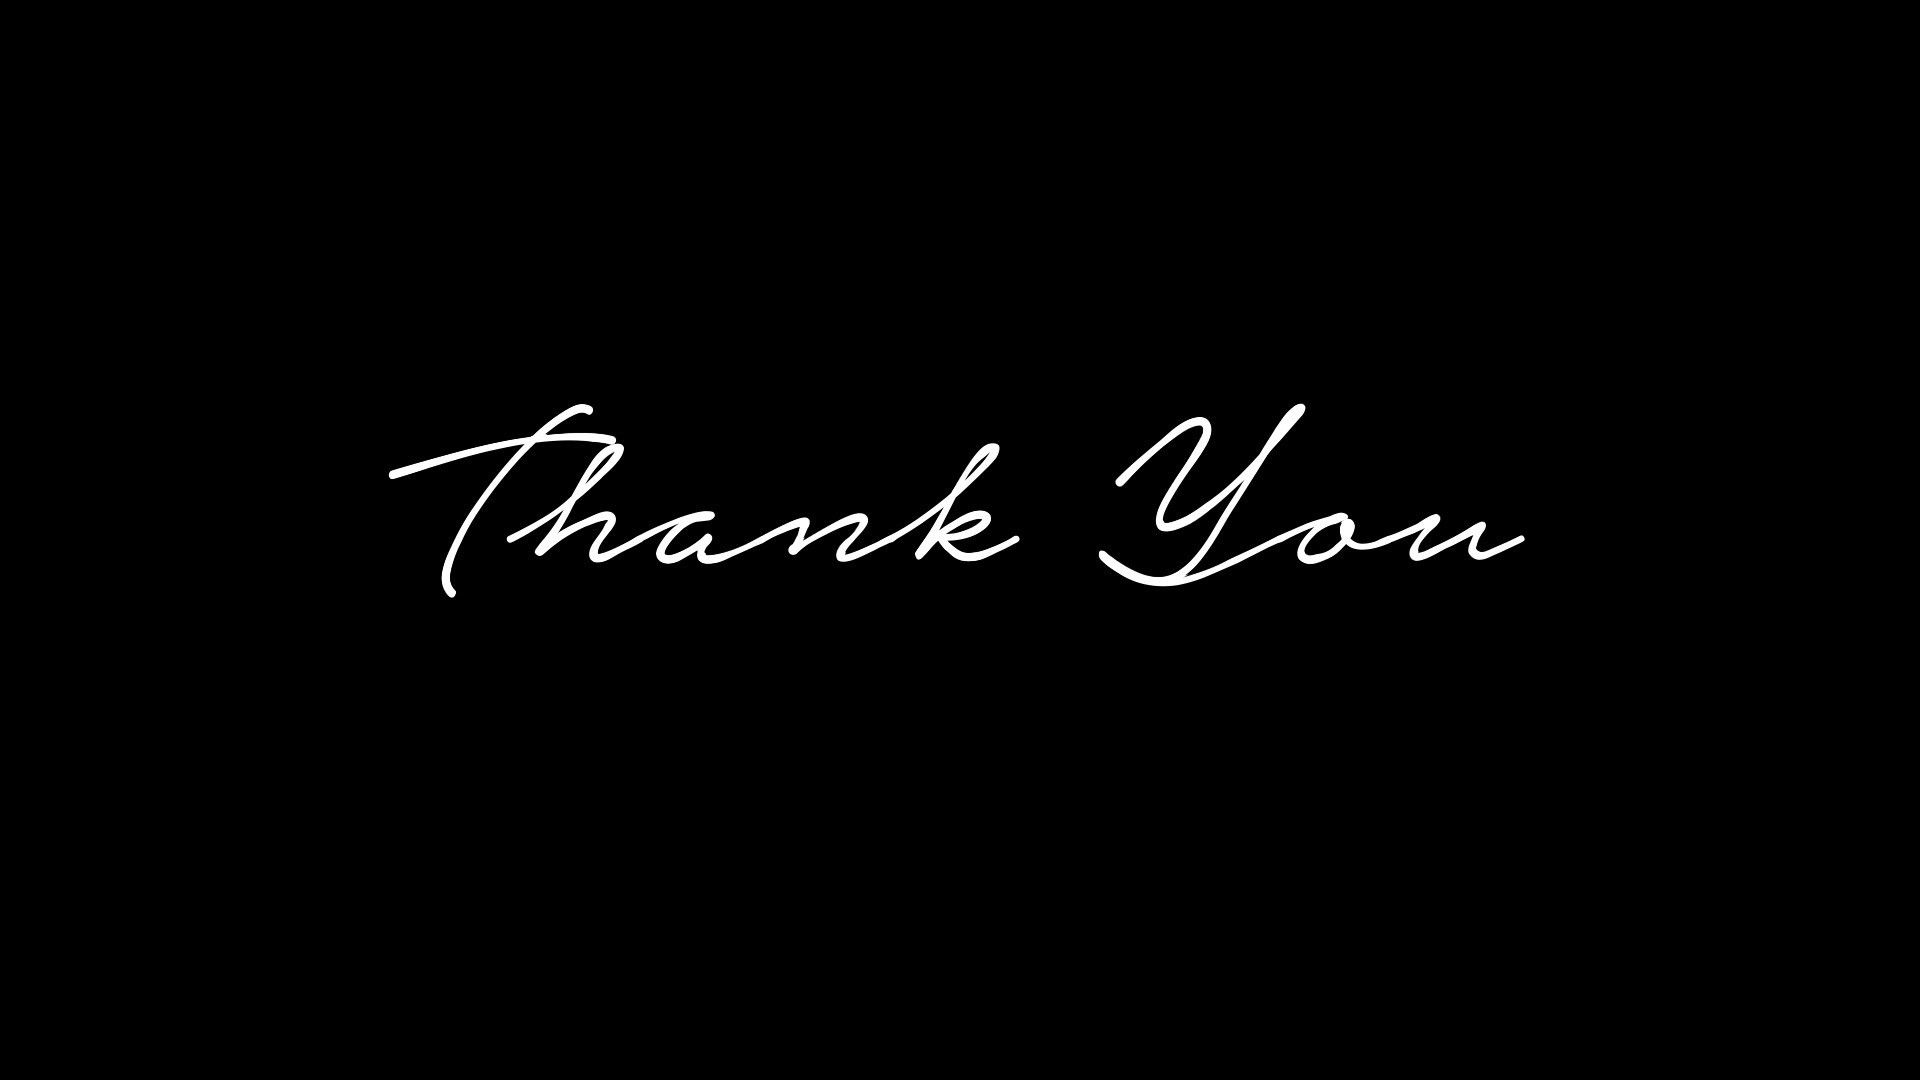 Thank You Aesthetic Wallpapers Wallpaper Cave